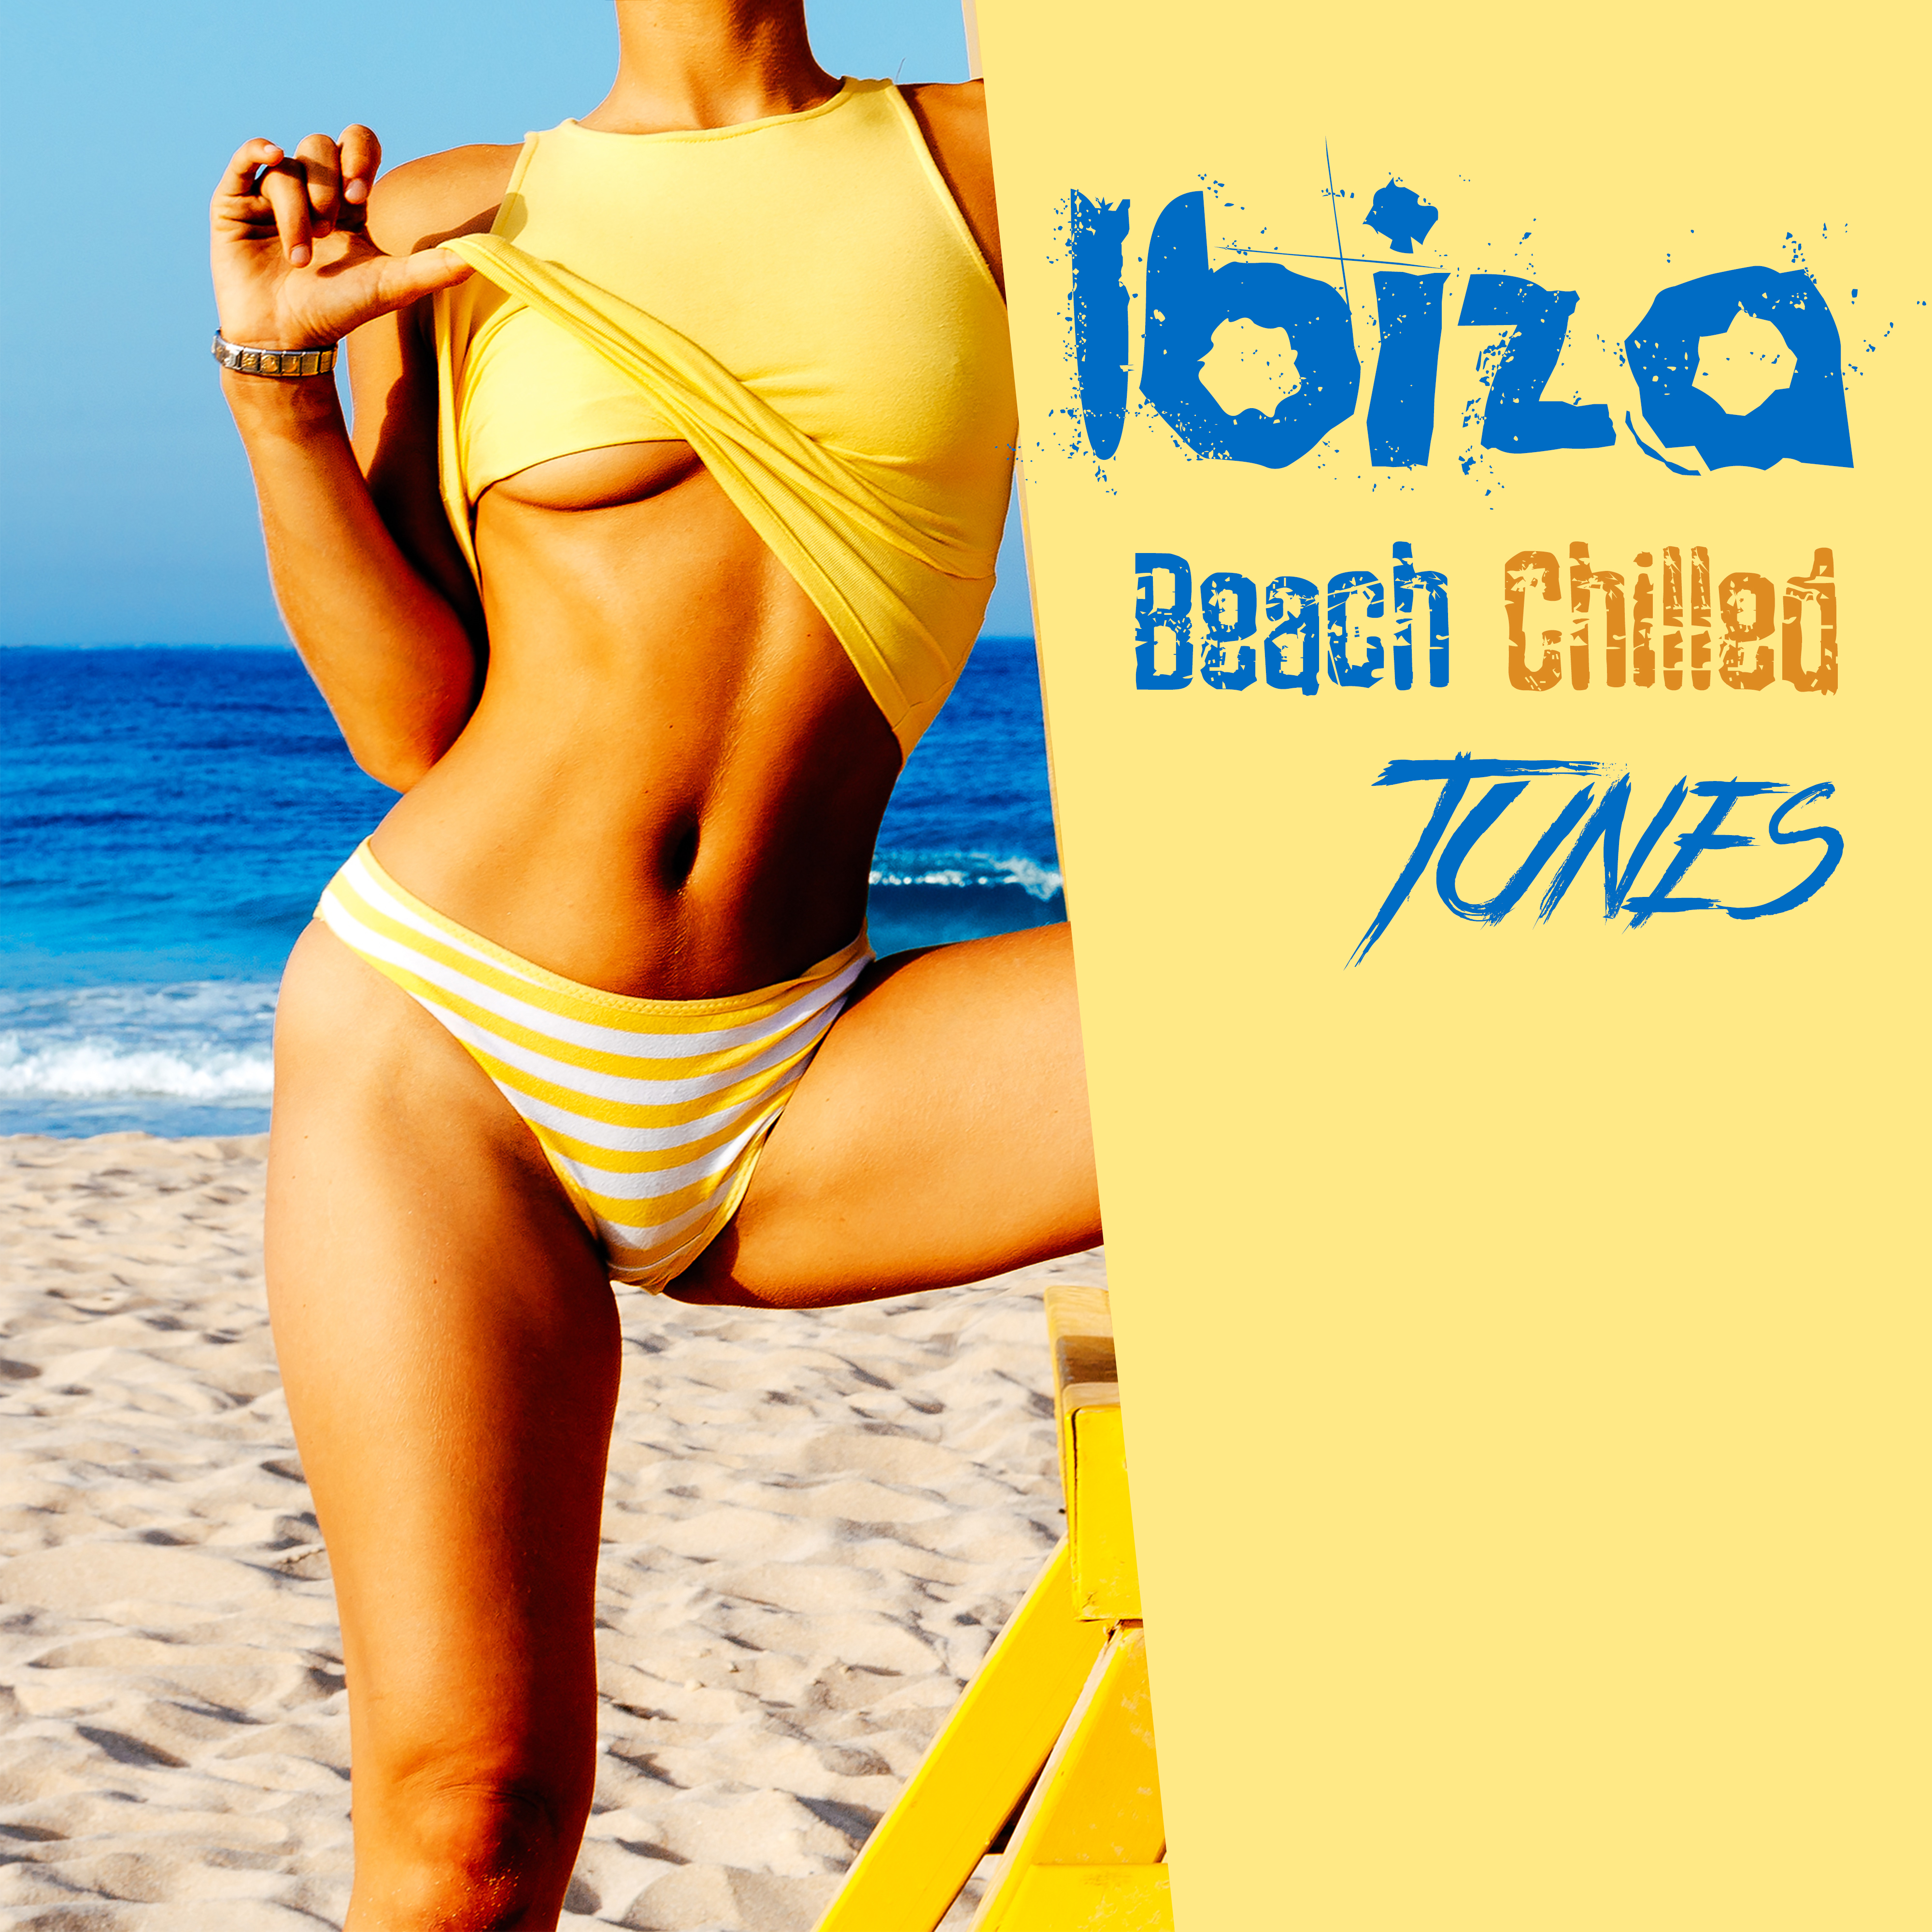 Ibiza Beach Chilled Tunes  Chill Out 2018